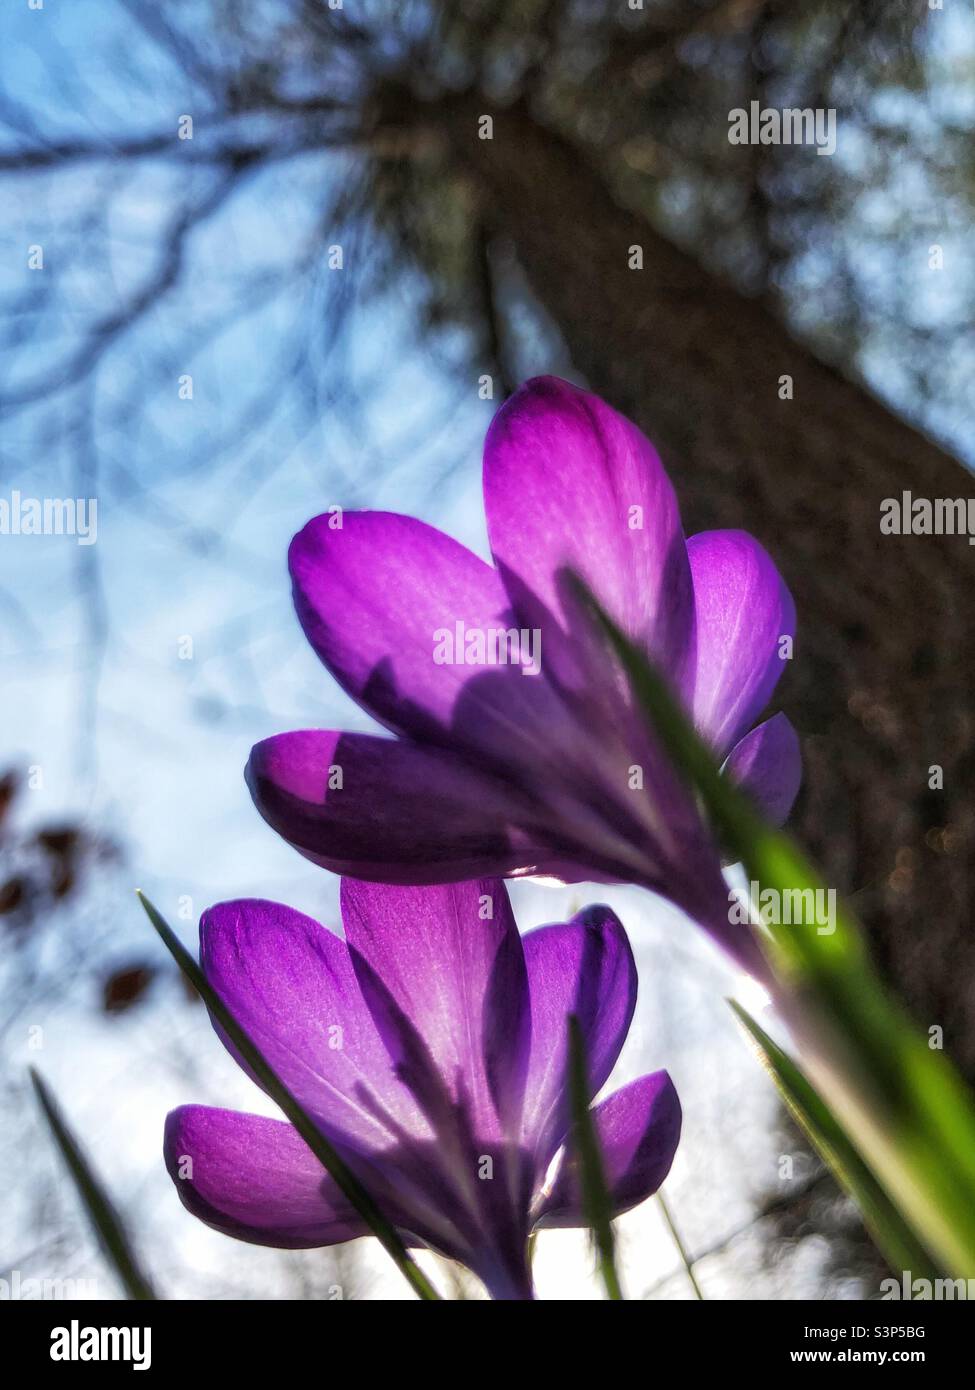 Ethereal photo of translucent purple crocus blossoms from underside looking upwards Stock Photo